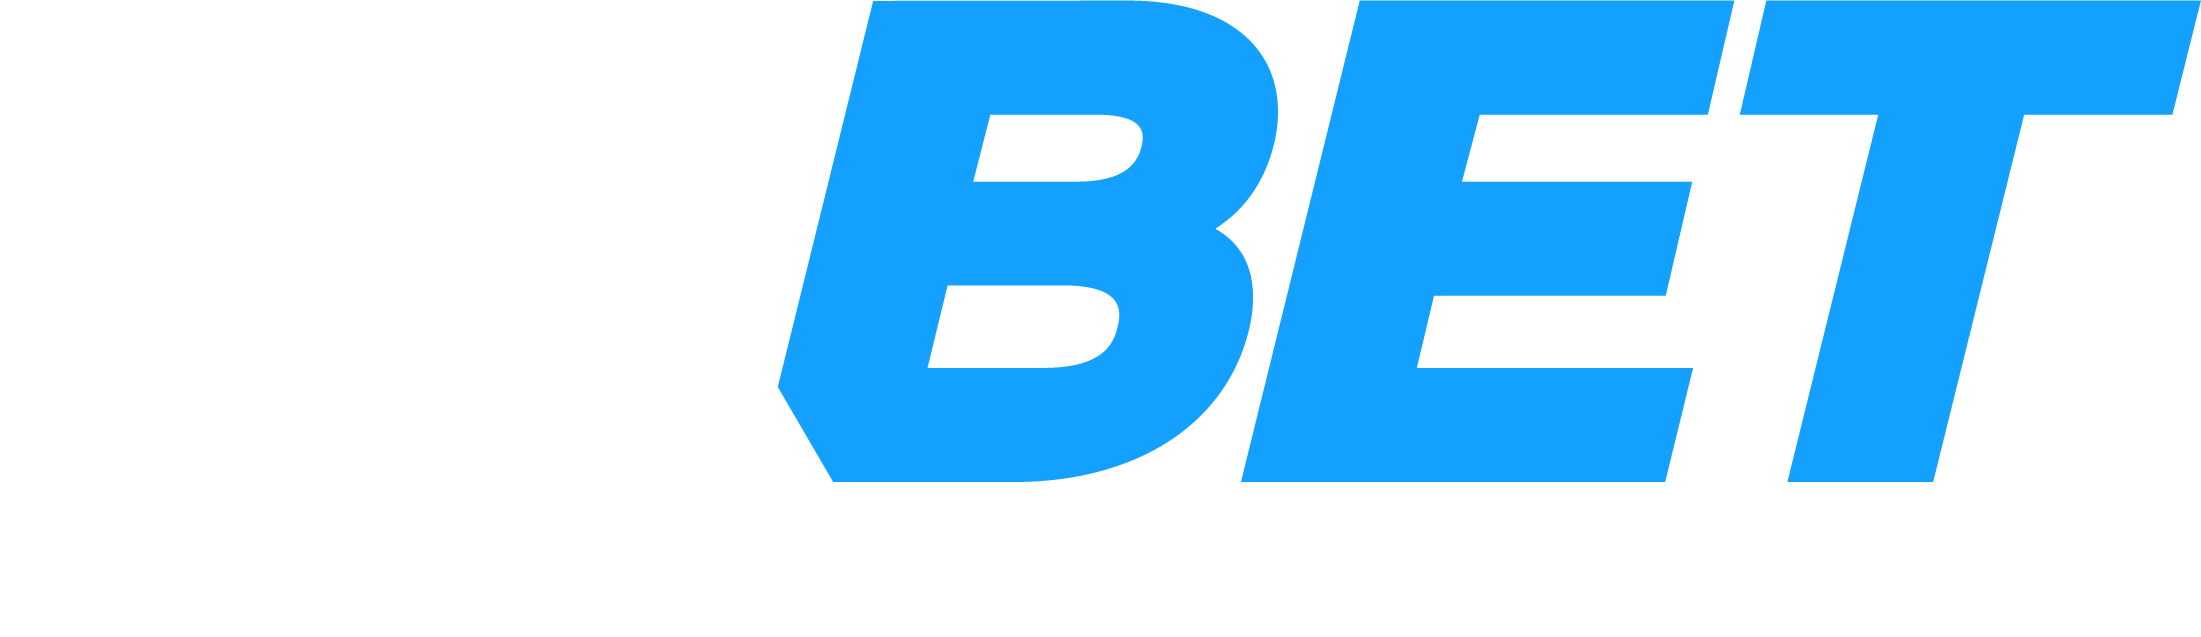 Mirror link to 1xBet